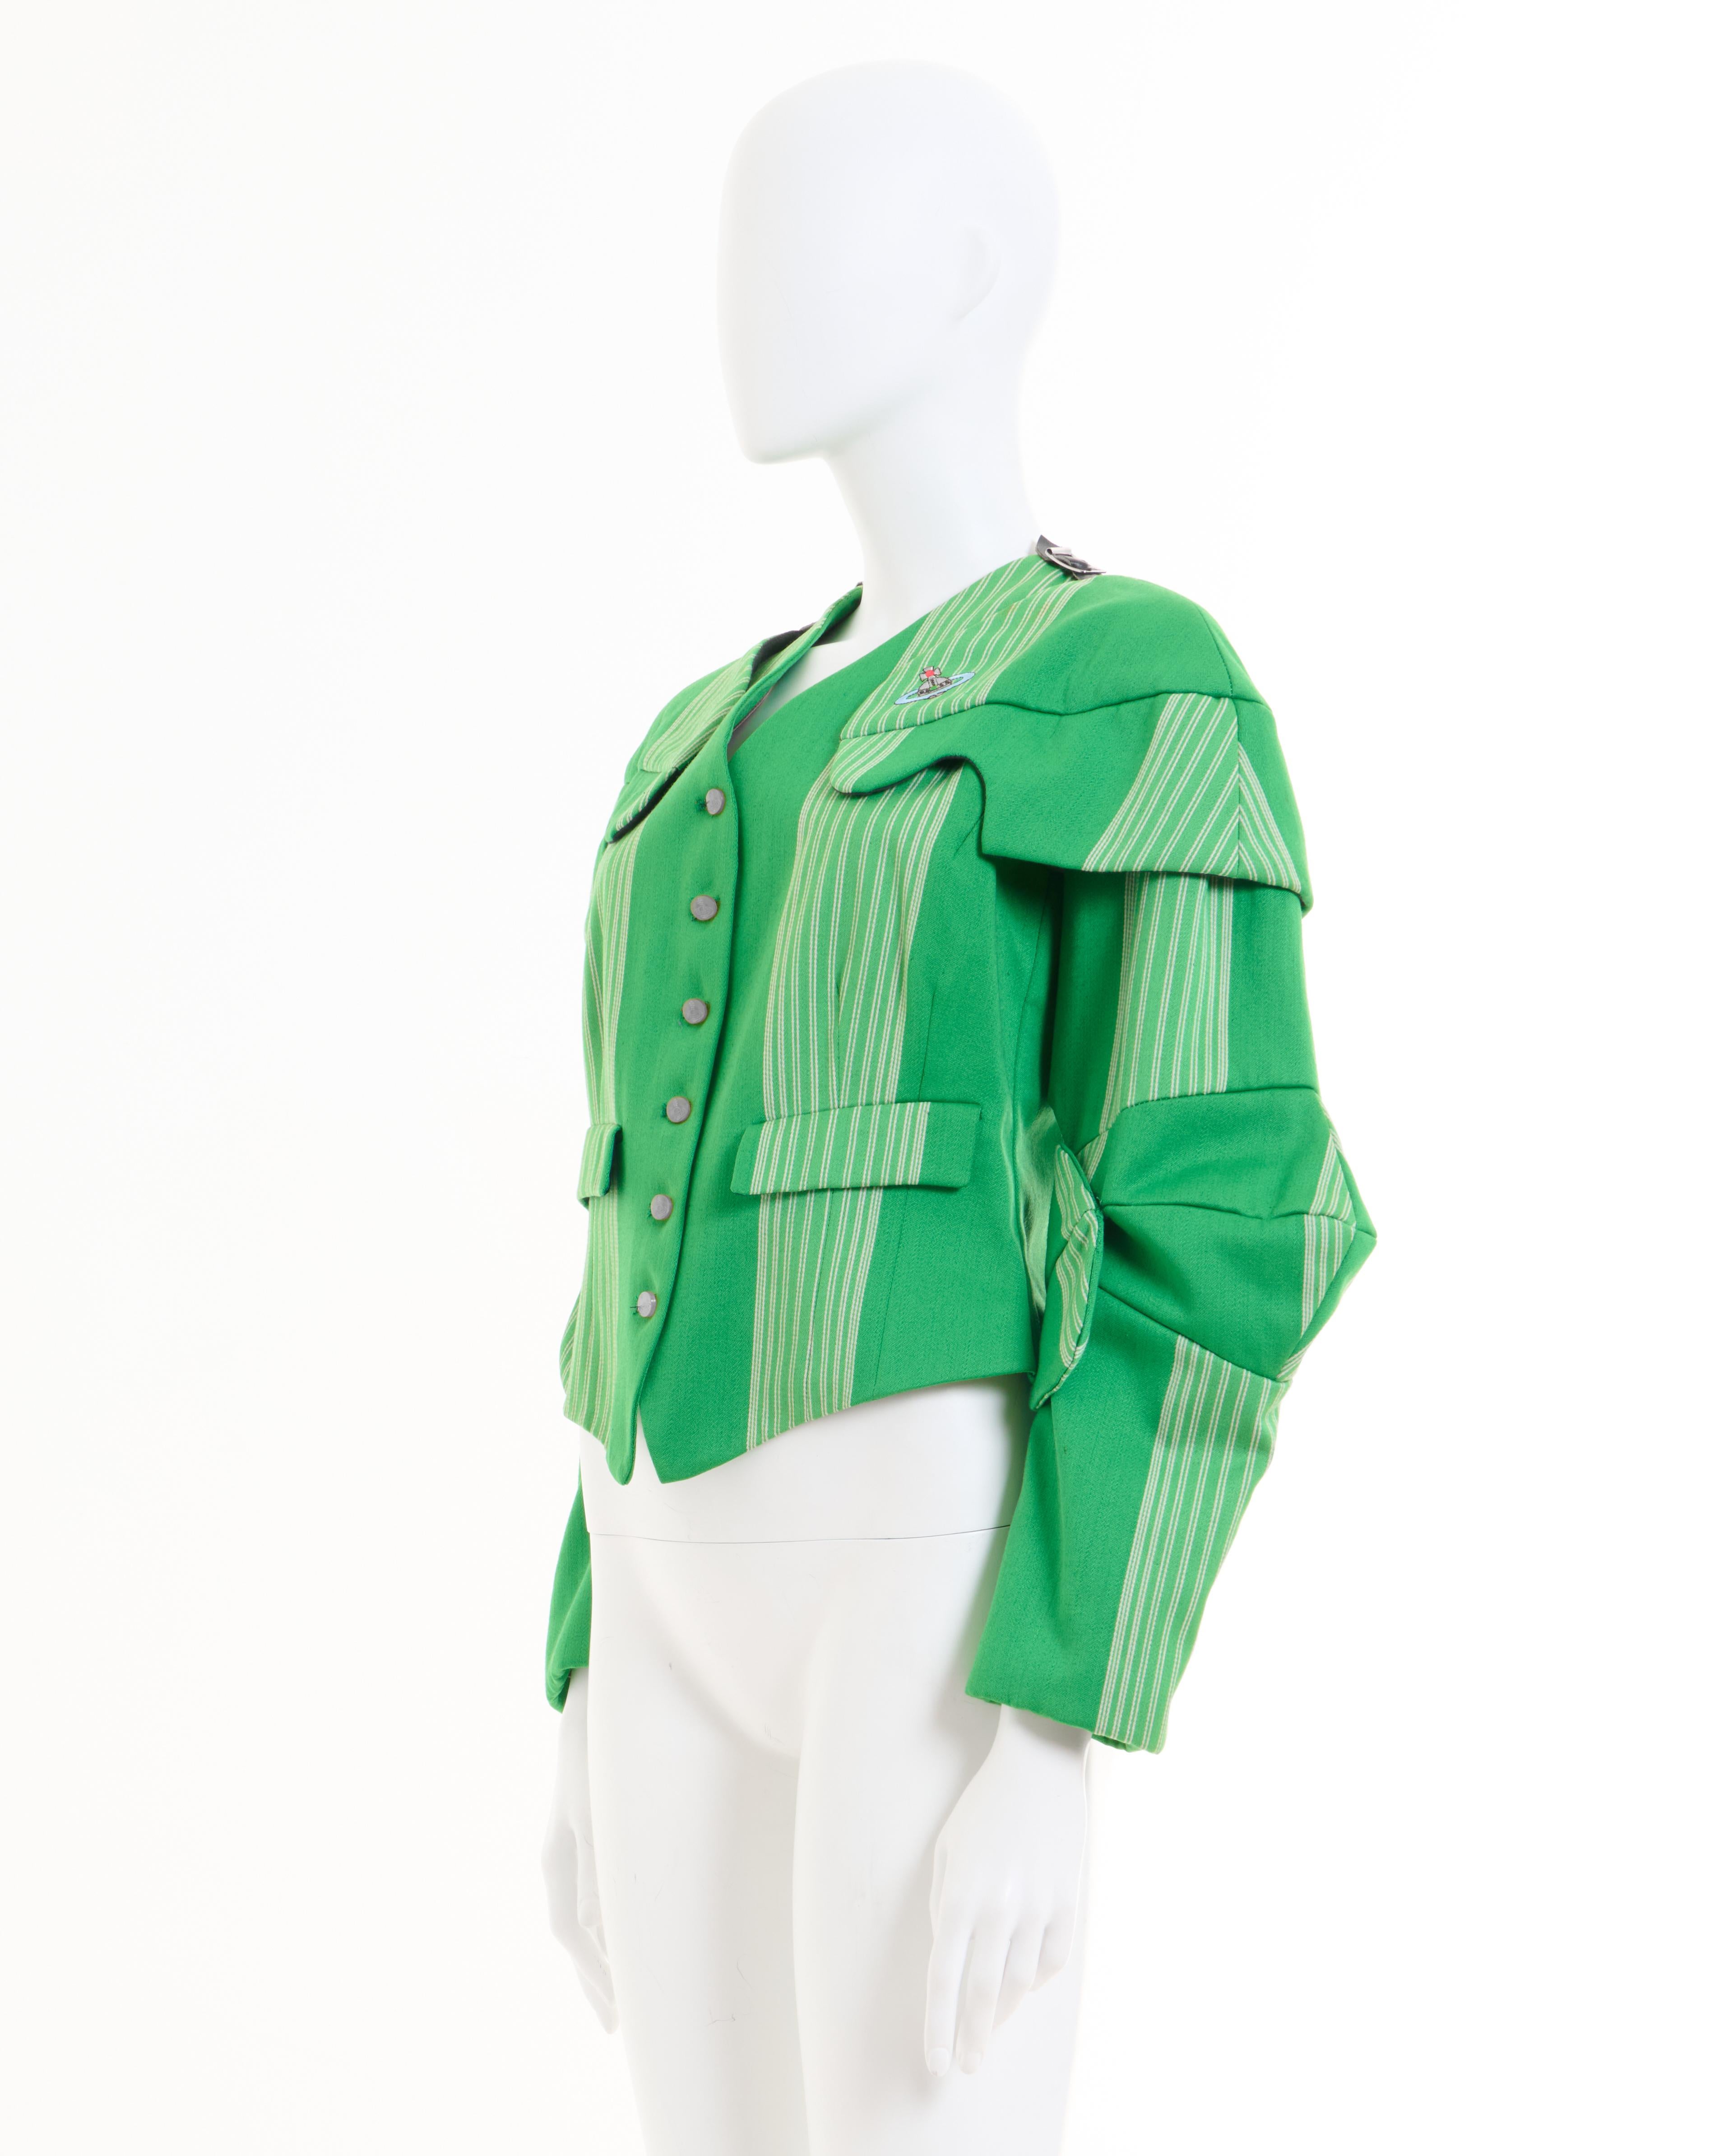 Vivienne Westwood  F/W 1988/89 ‘Time Machine’ Green striped Armour jacket In Good Condition For Sale In Milano, IT